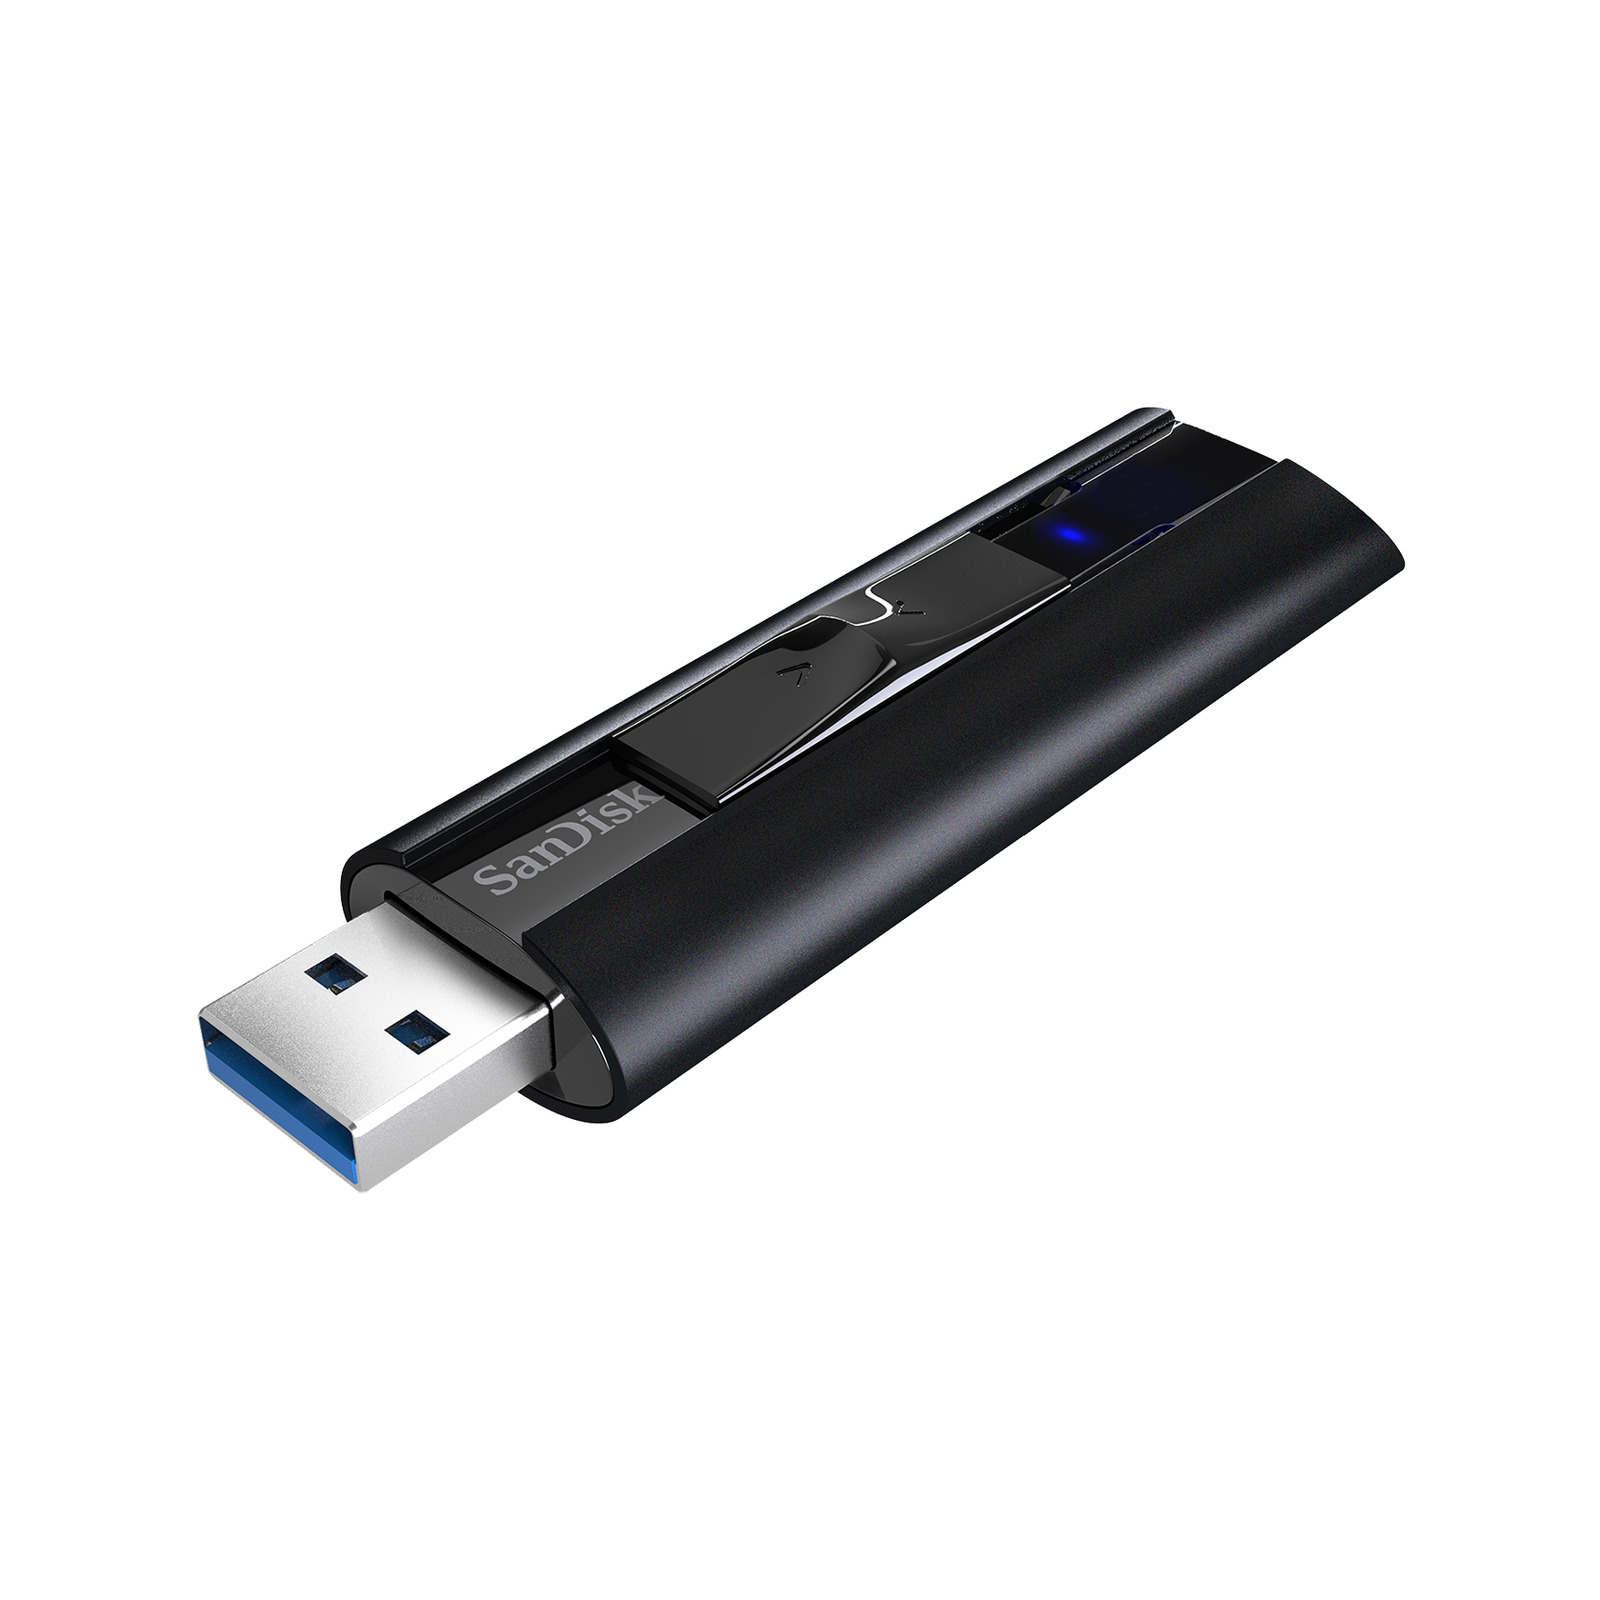 SanDisk 1TB Extreme PRO USB 3.2 Solid State Flash Drive - SDCZ880-1T00-G46